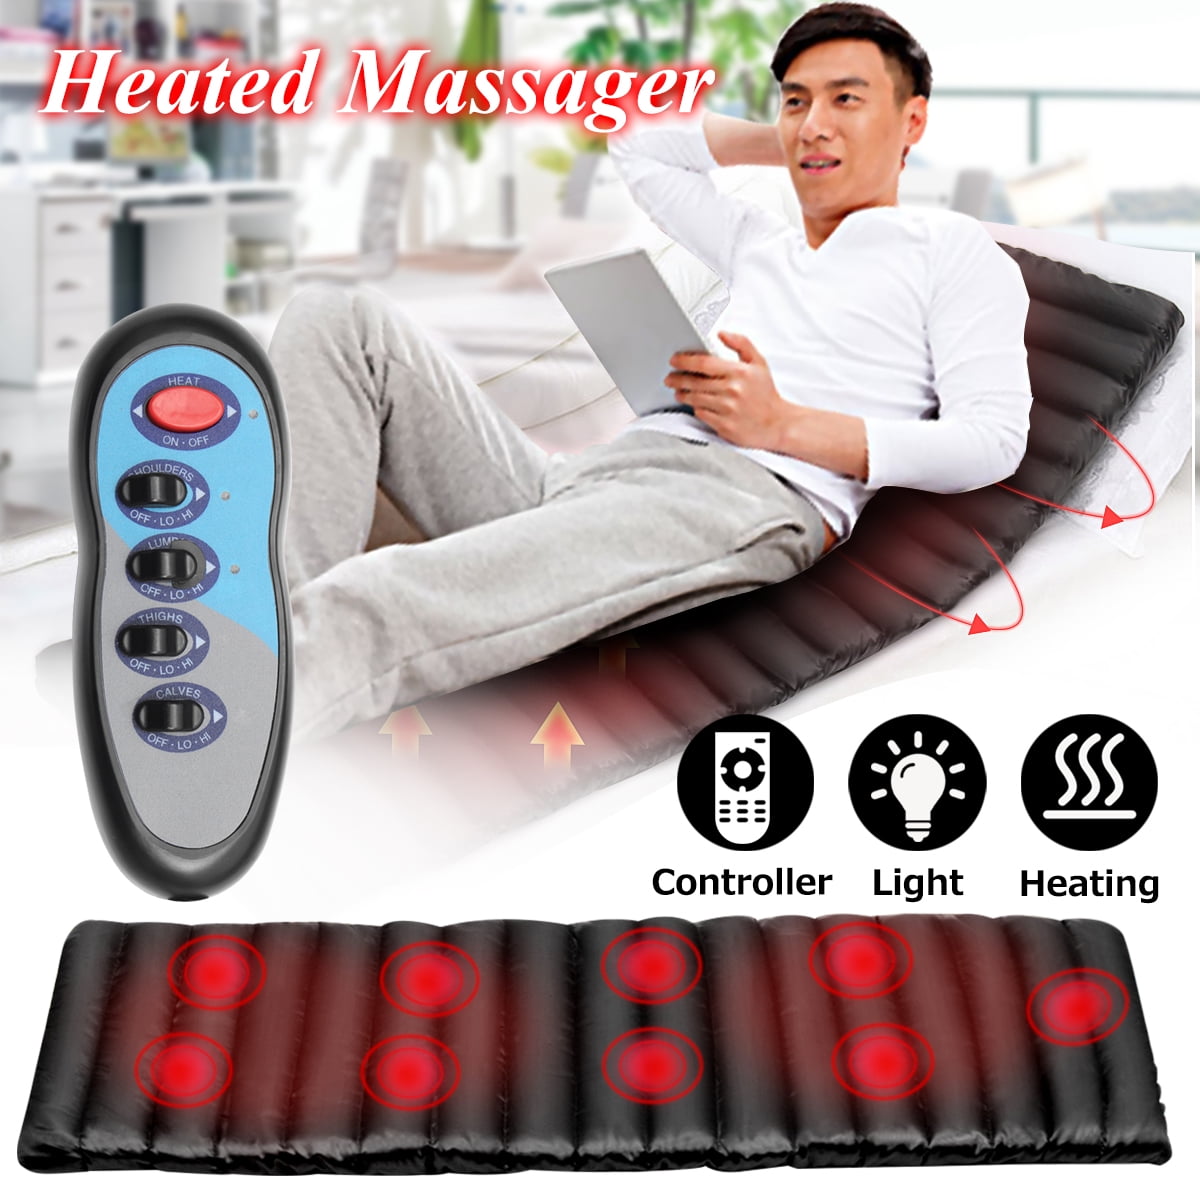 Full Body Heated Massager Remote Control Cushion Sofa Bed Massage Mat